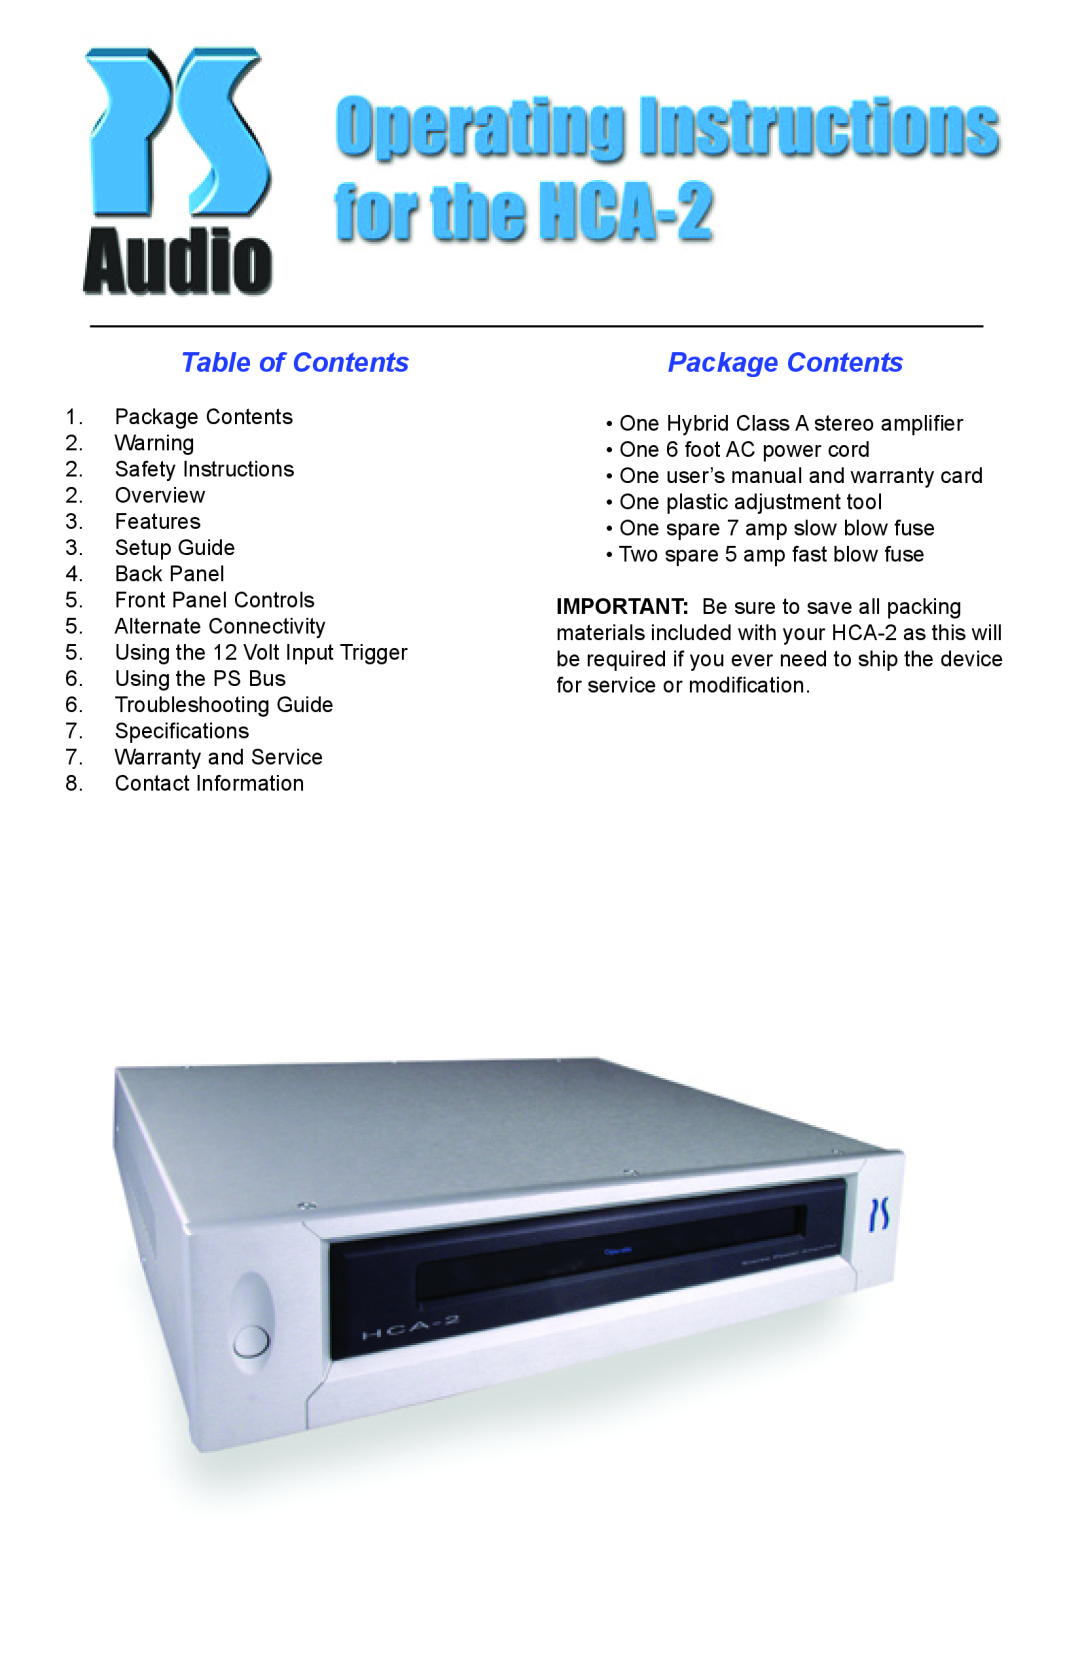 PS Audio HCA-2 setup guide Table of Contents, Package Contents 